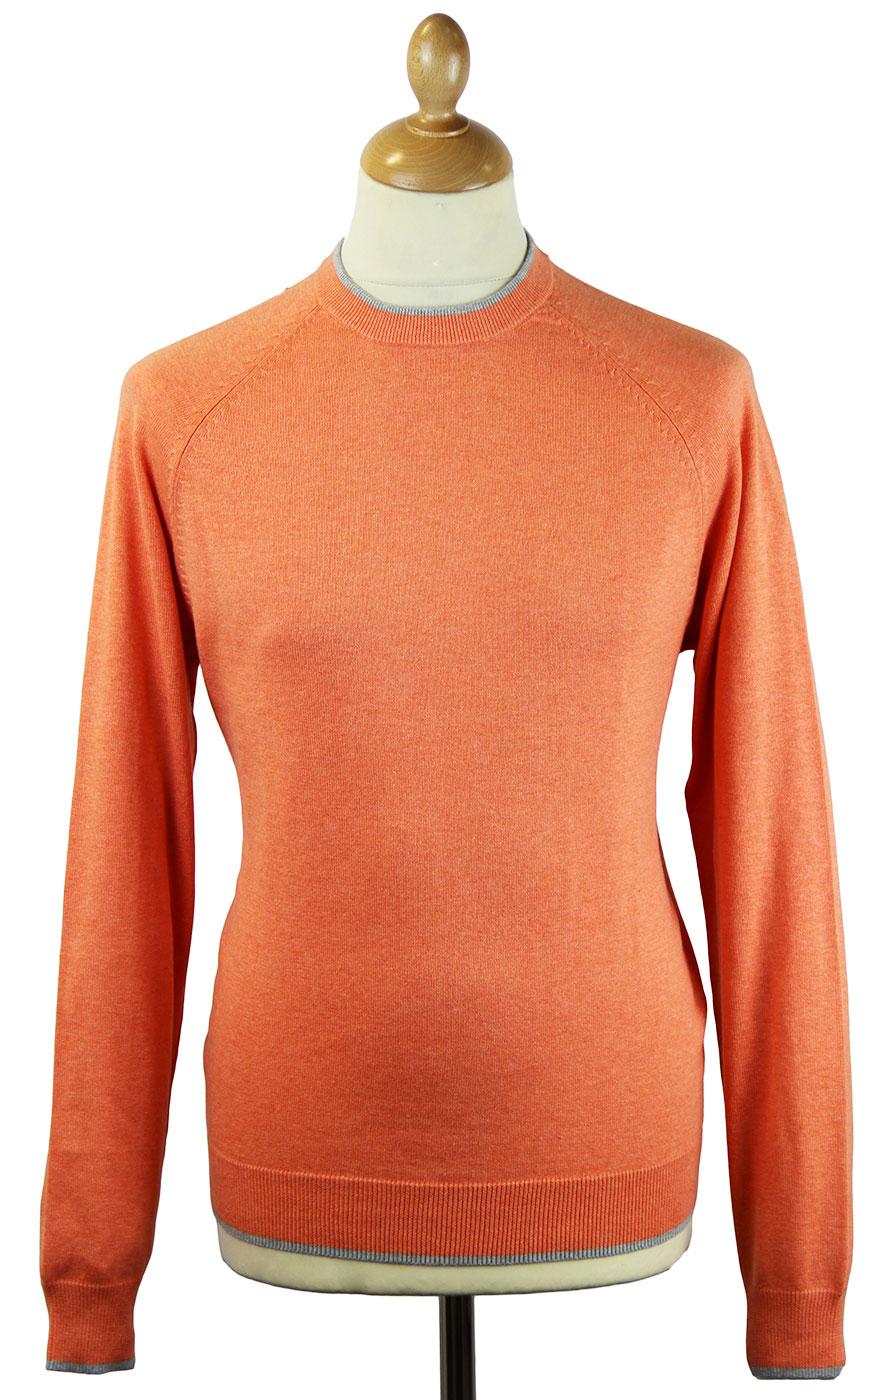 Thornhill ALAN PAINE Luxury Cotton Tipped Jumper S